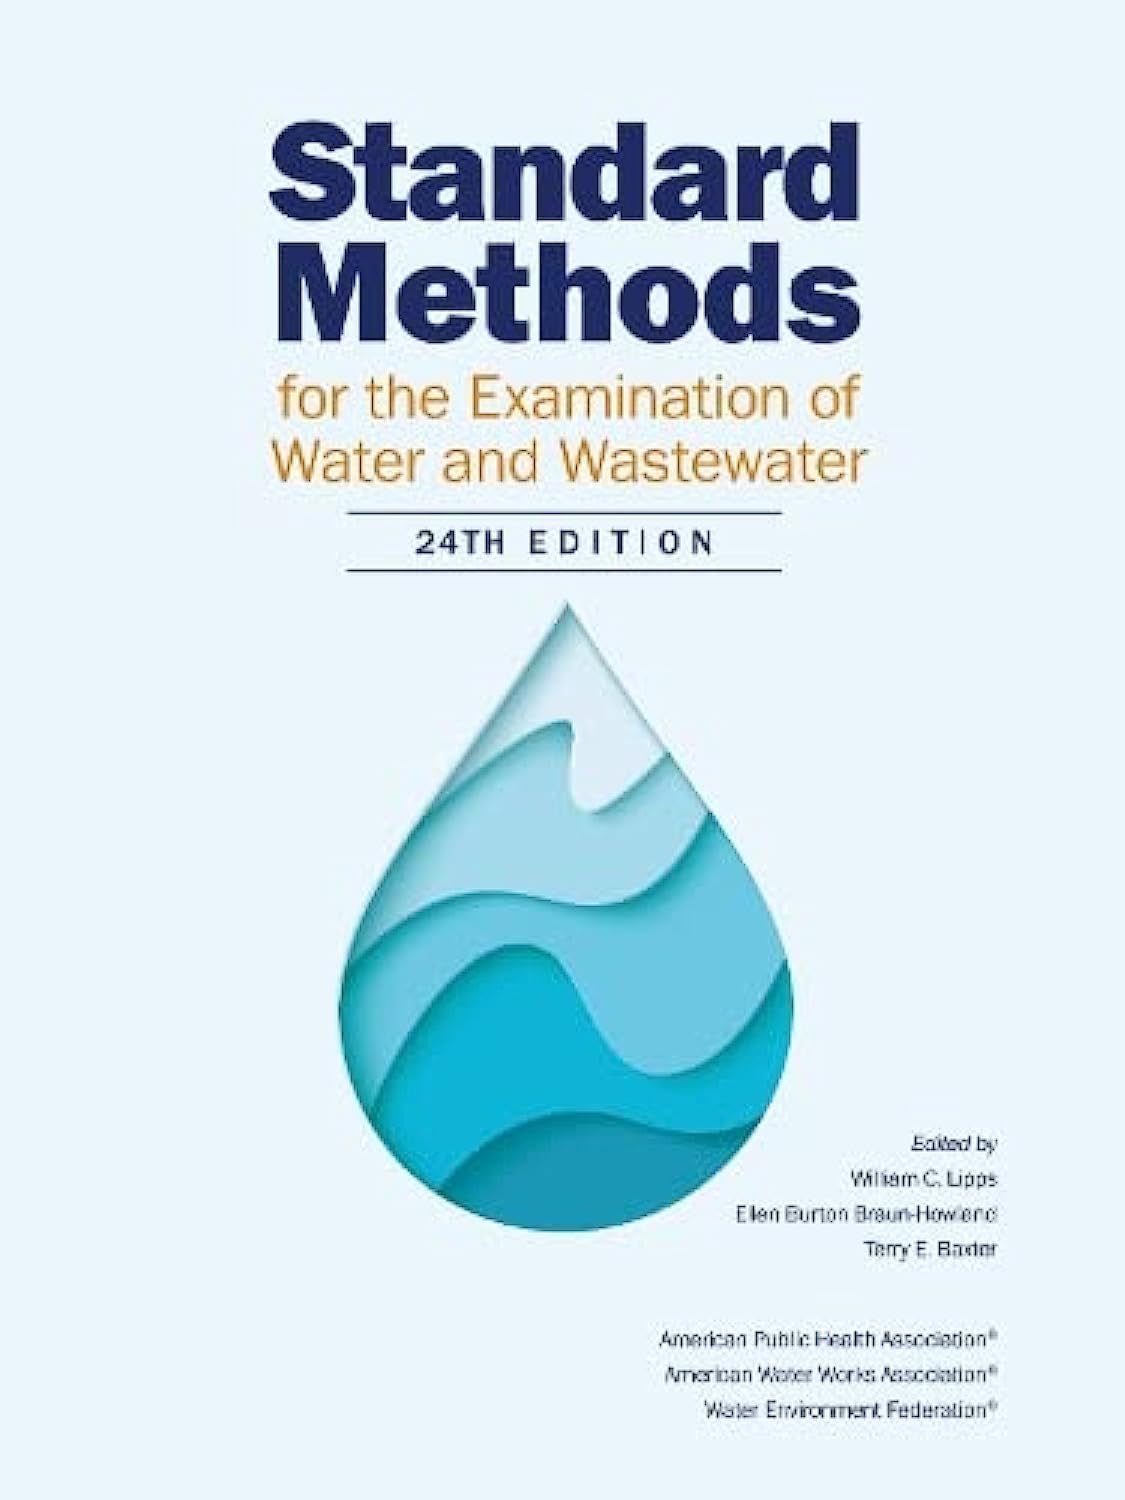 Standard Methods for the Examination of Water and Wastewater 24th Edition (APHA)